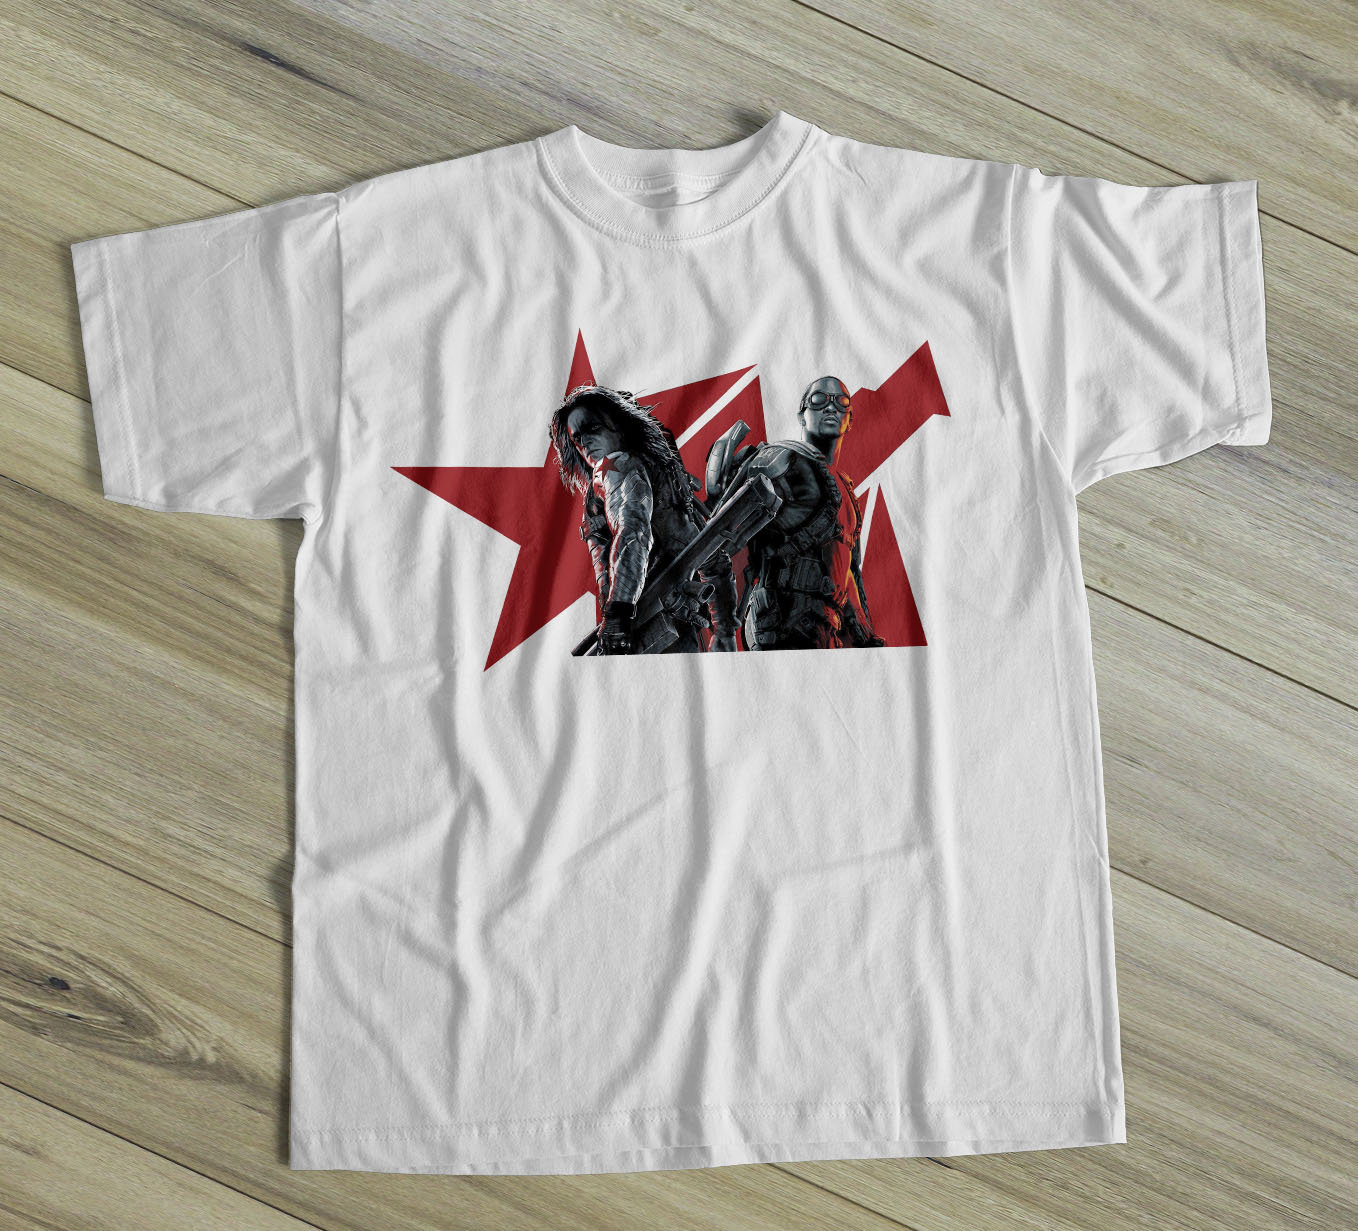 The-falcon-and-the-winter-soldier-shirt-avengers-shirt-falcon-shirt-winter-soldier-shirt-superhero-shirt-comics-shirt-avengers-t-shirt-es6dn